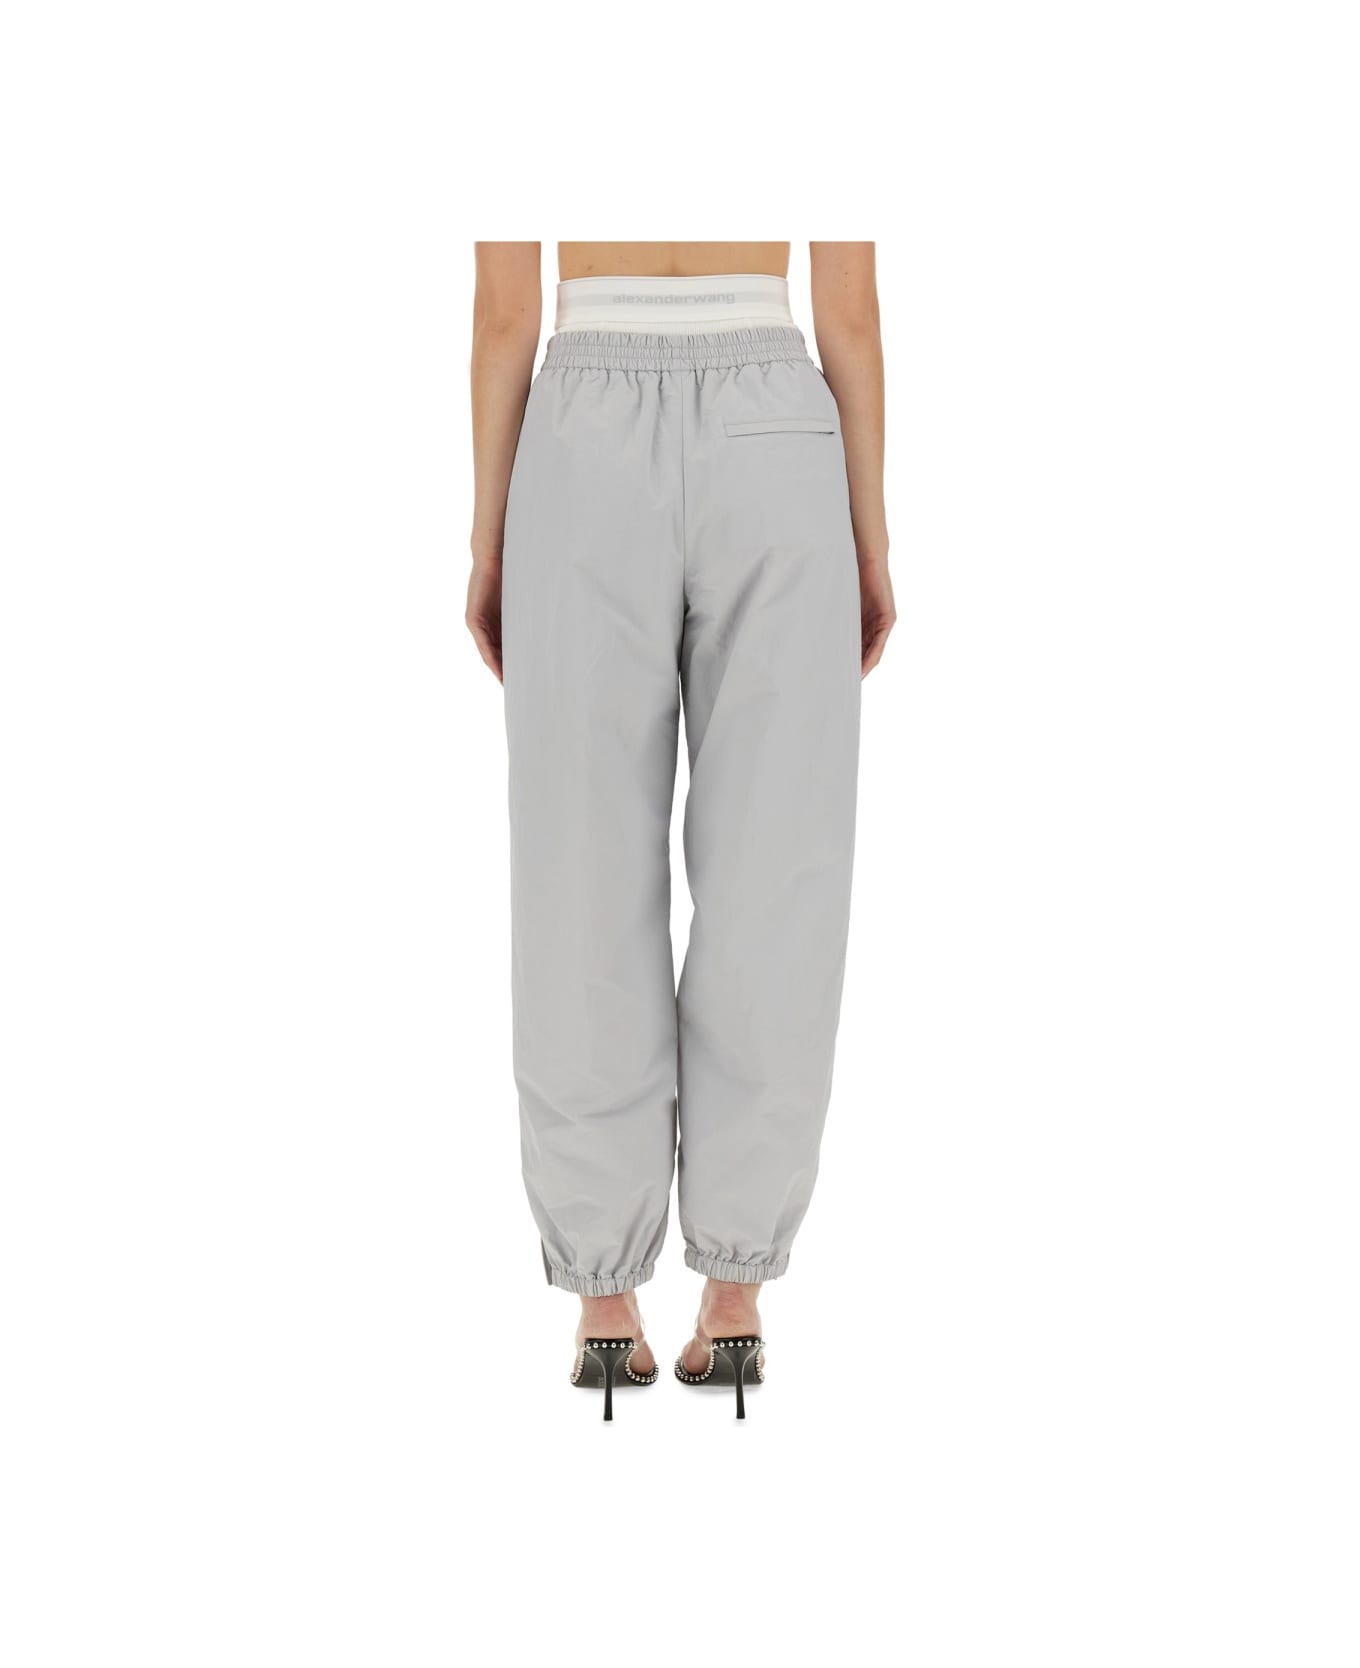 Alexander Wang Sports Pants With Integrated Underwear - GREY